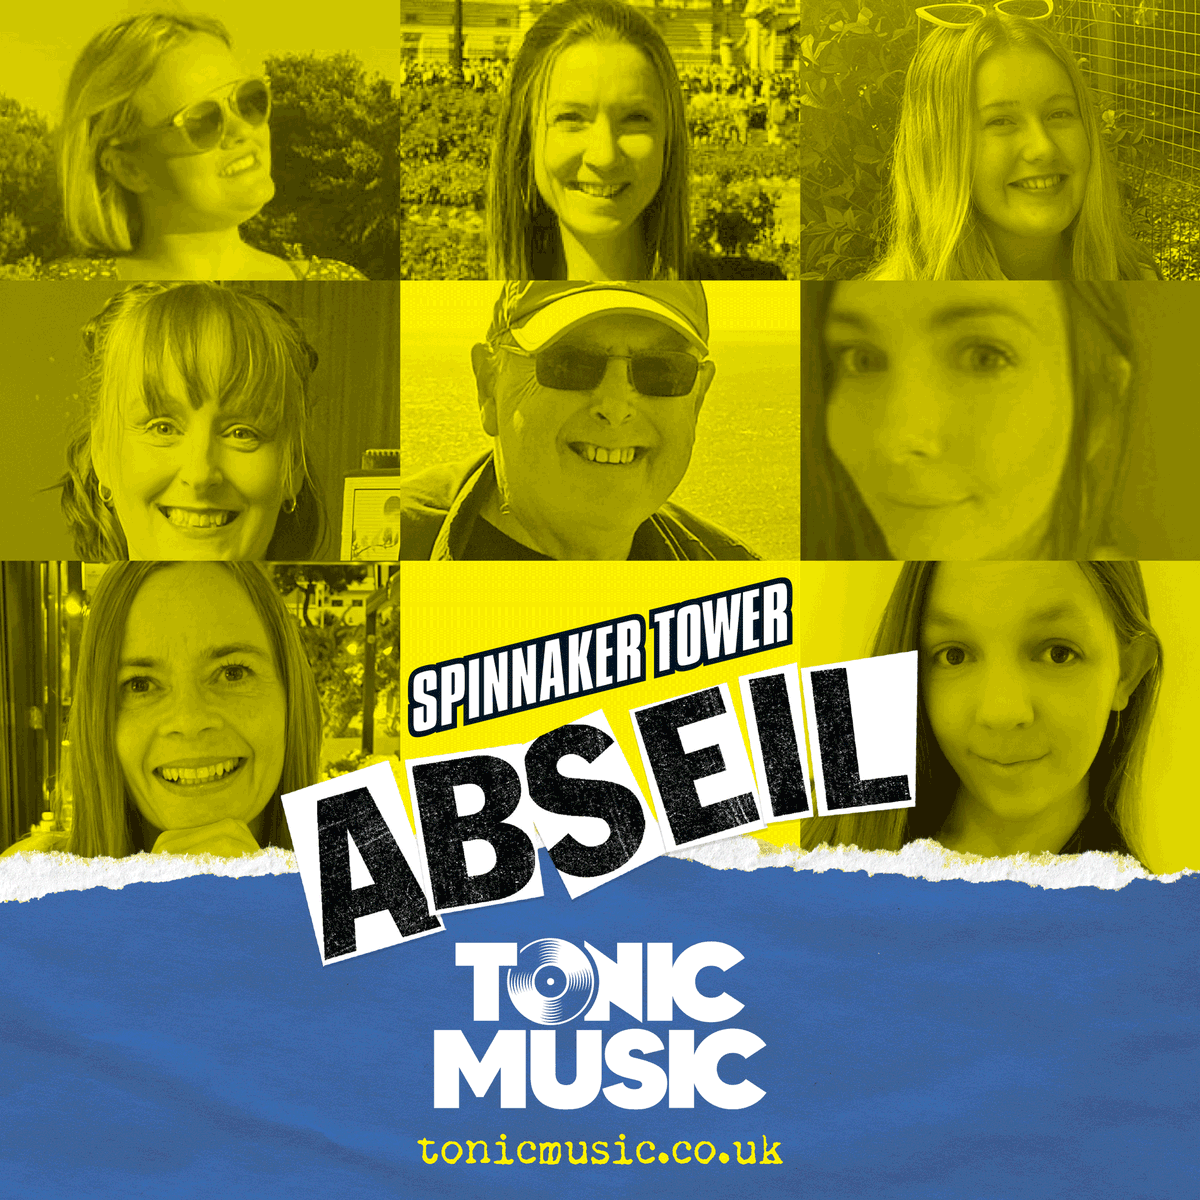 Good luck to our abseilers Lauren, Jenna, Nicole, Kerry, Steve, Lauren, Janette and Saffron who today will conquer the @SpinnakerTower in Portsmouth in aid of Tonic Music. First abseil is at 9am. #MentalHealth #Music #Tonic #Wellbeing #Abseiling